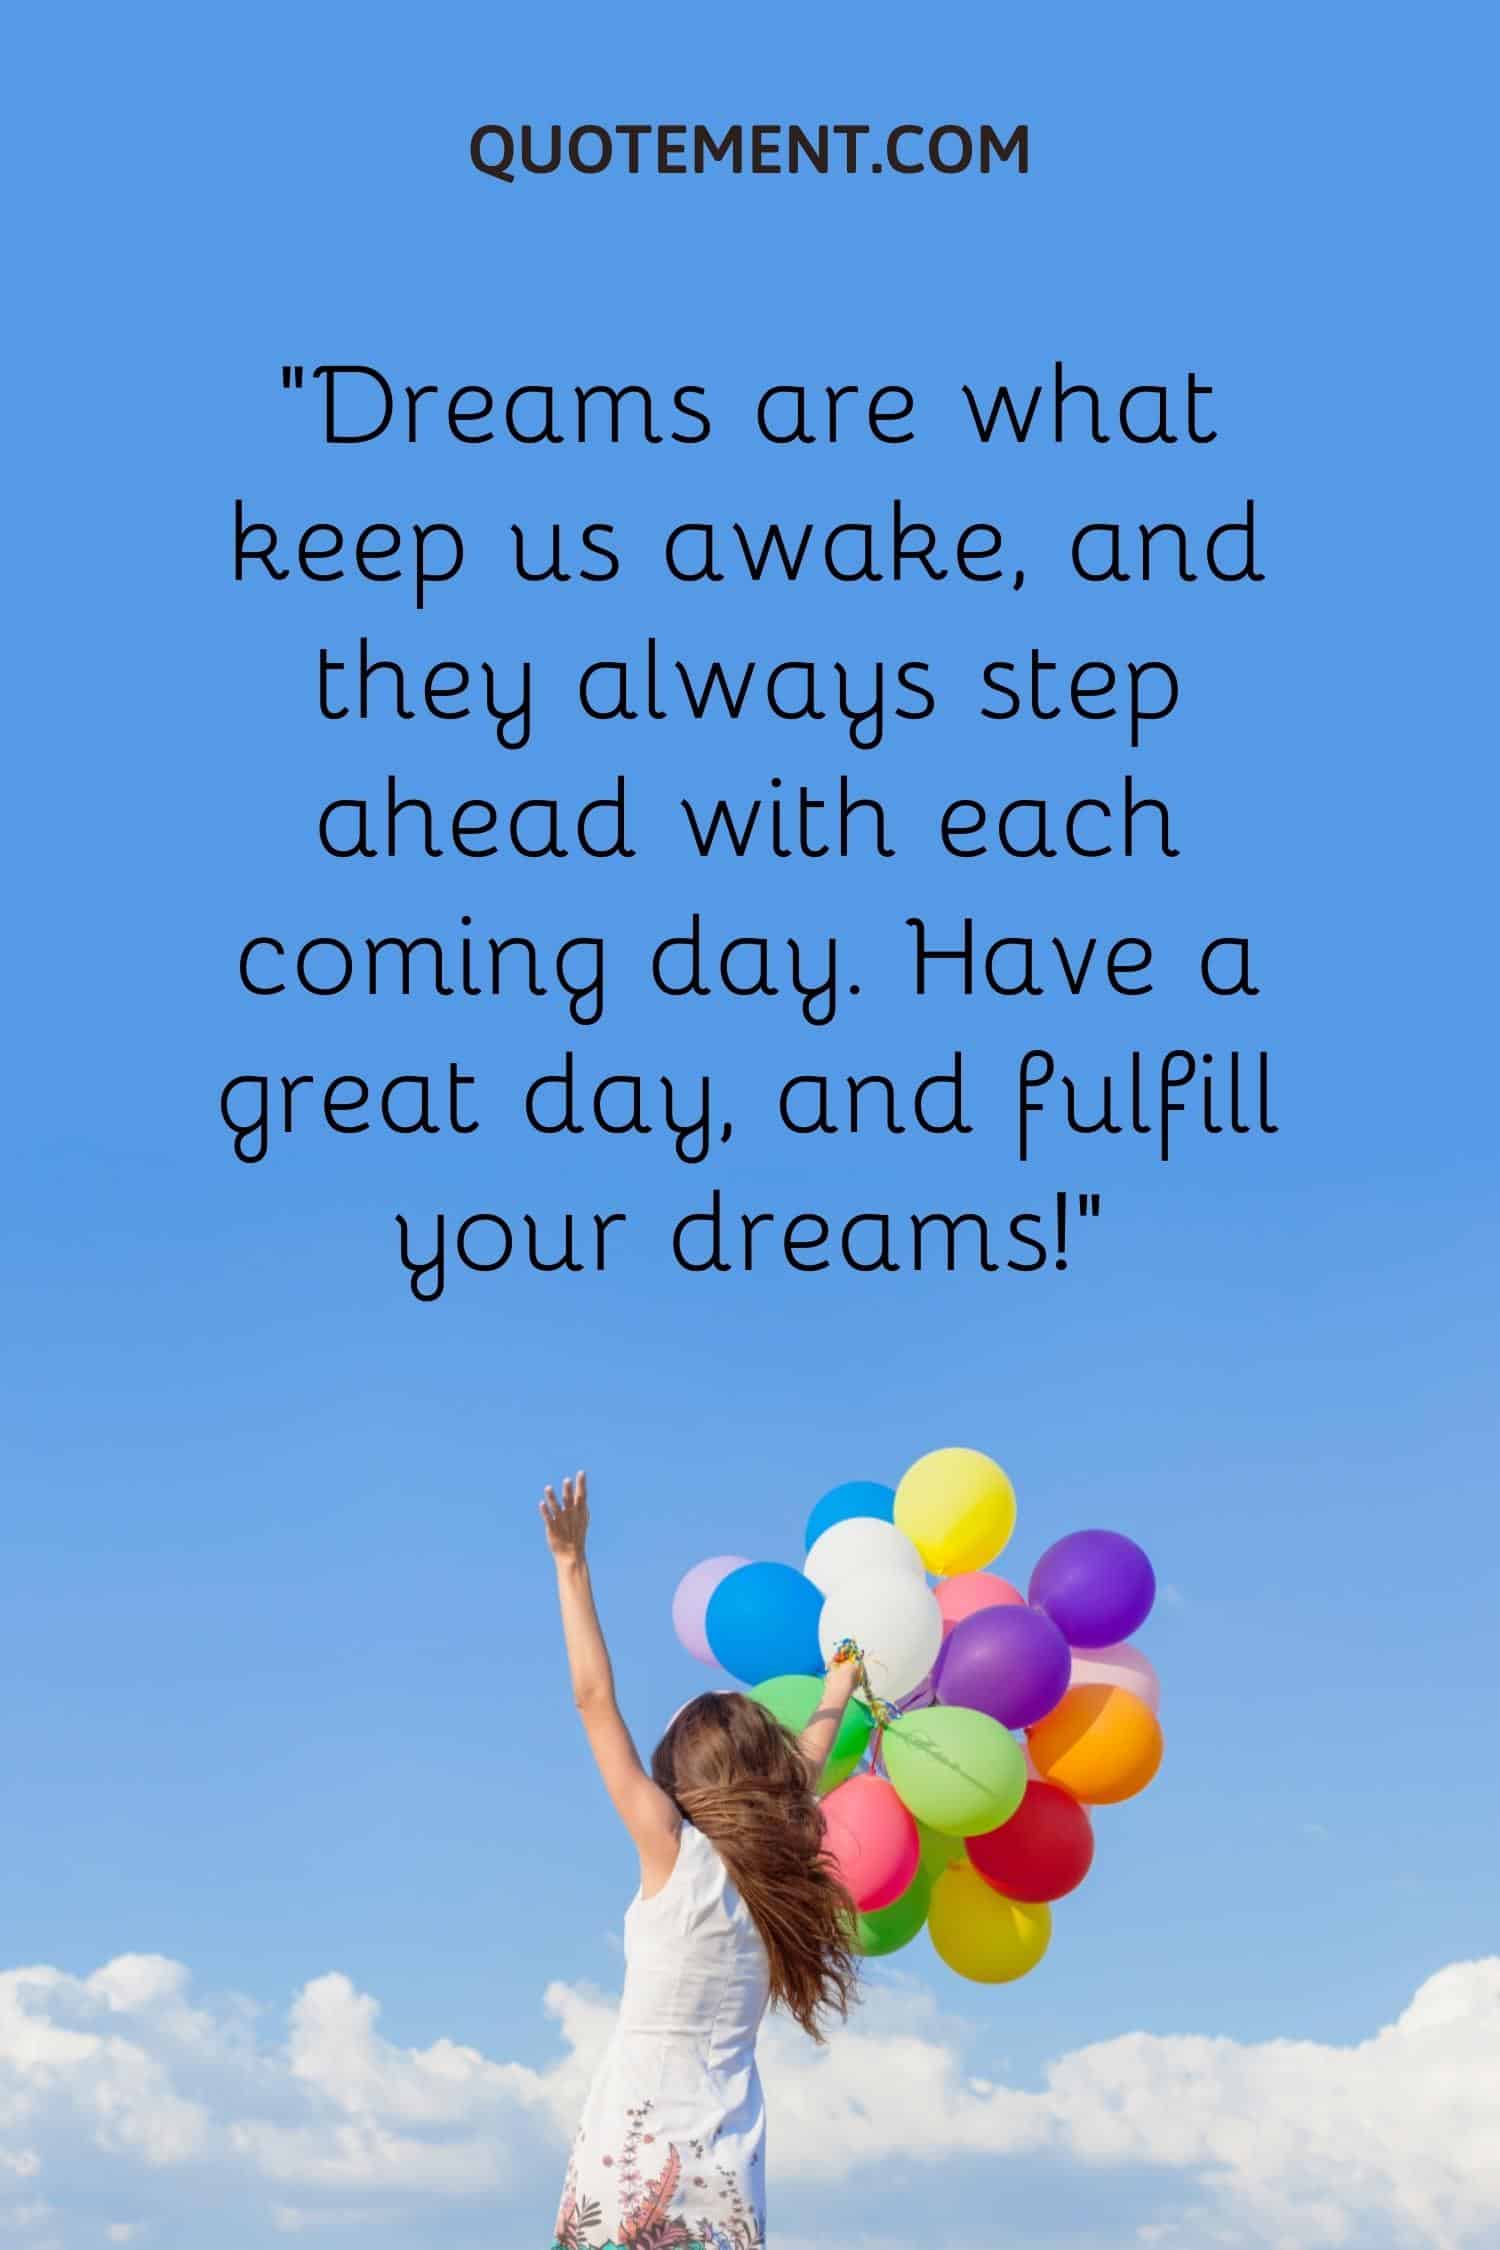 Dreams are what keep us awake, and they always step ahead with each coming day